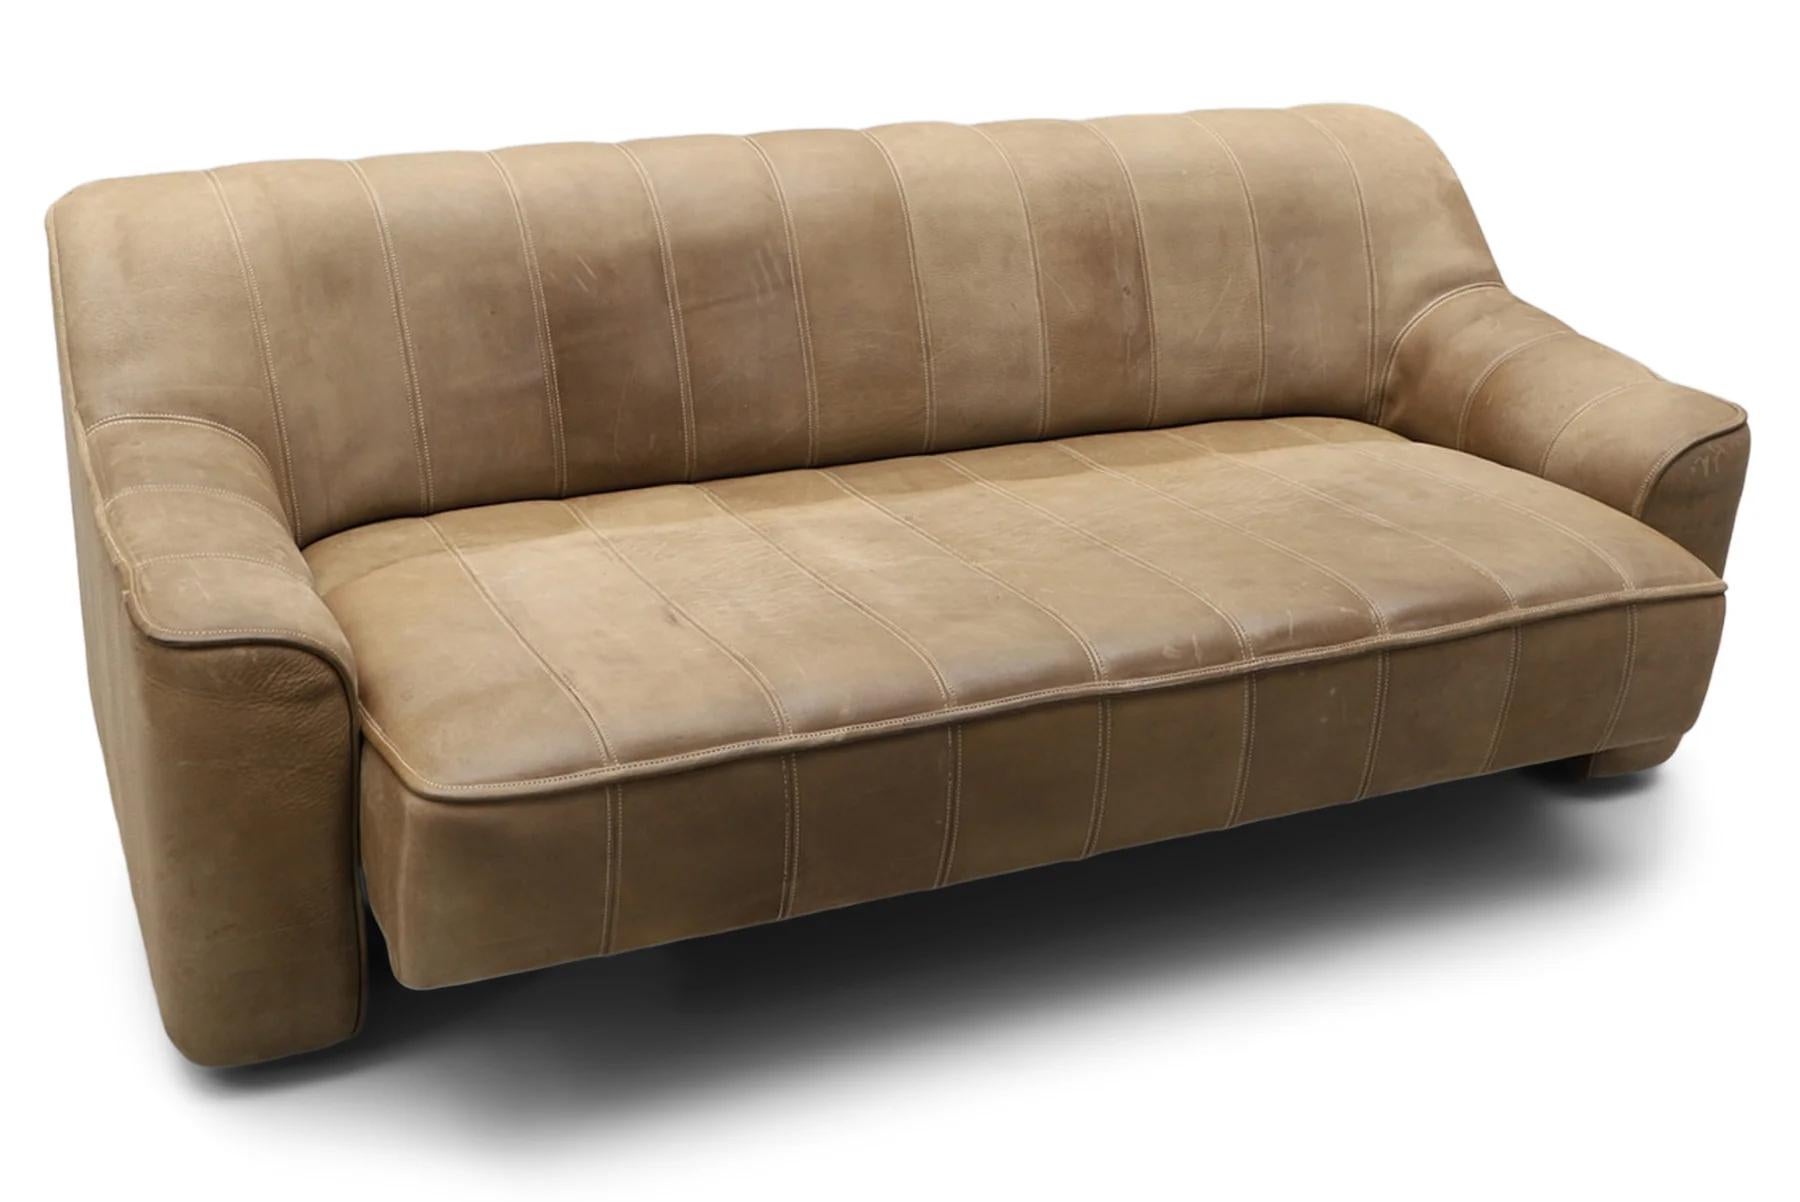 Swiss De sede ds 44 three seat extendable sofa in buffalo leather For Sale